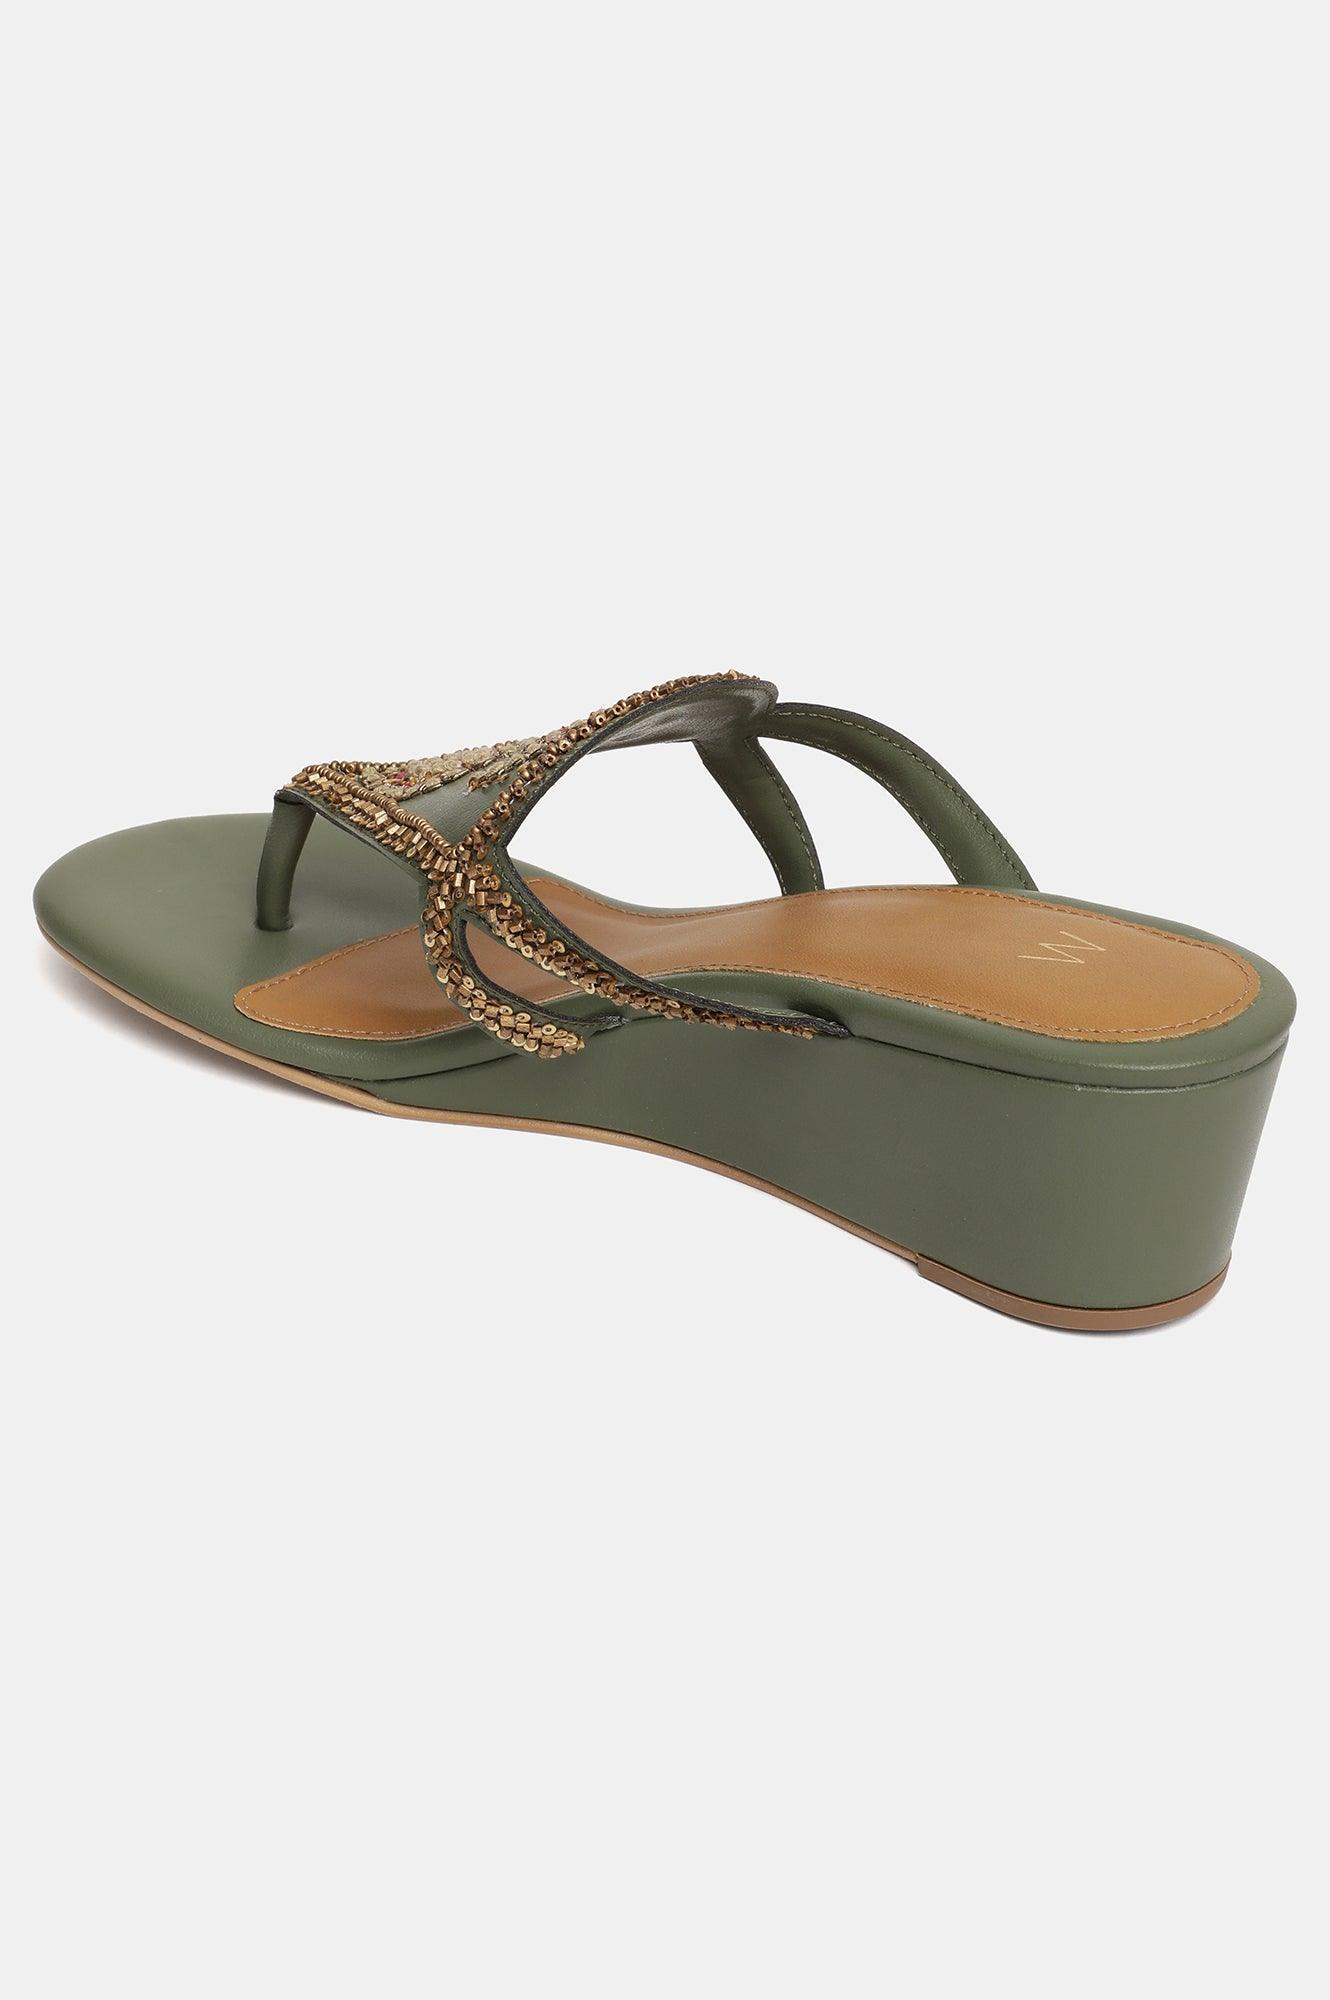 W Olive Embroidered Almond Toe Wedge-Whannah - wforwoman